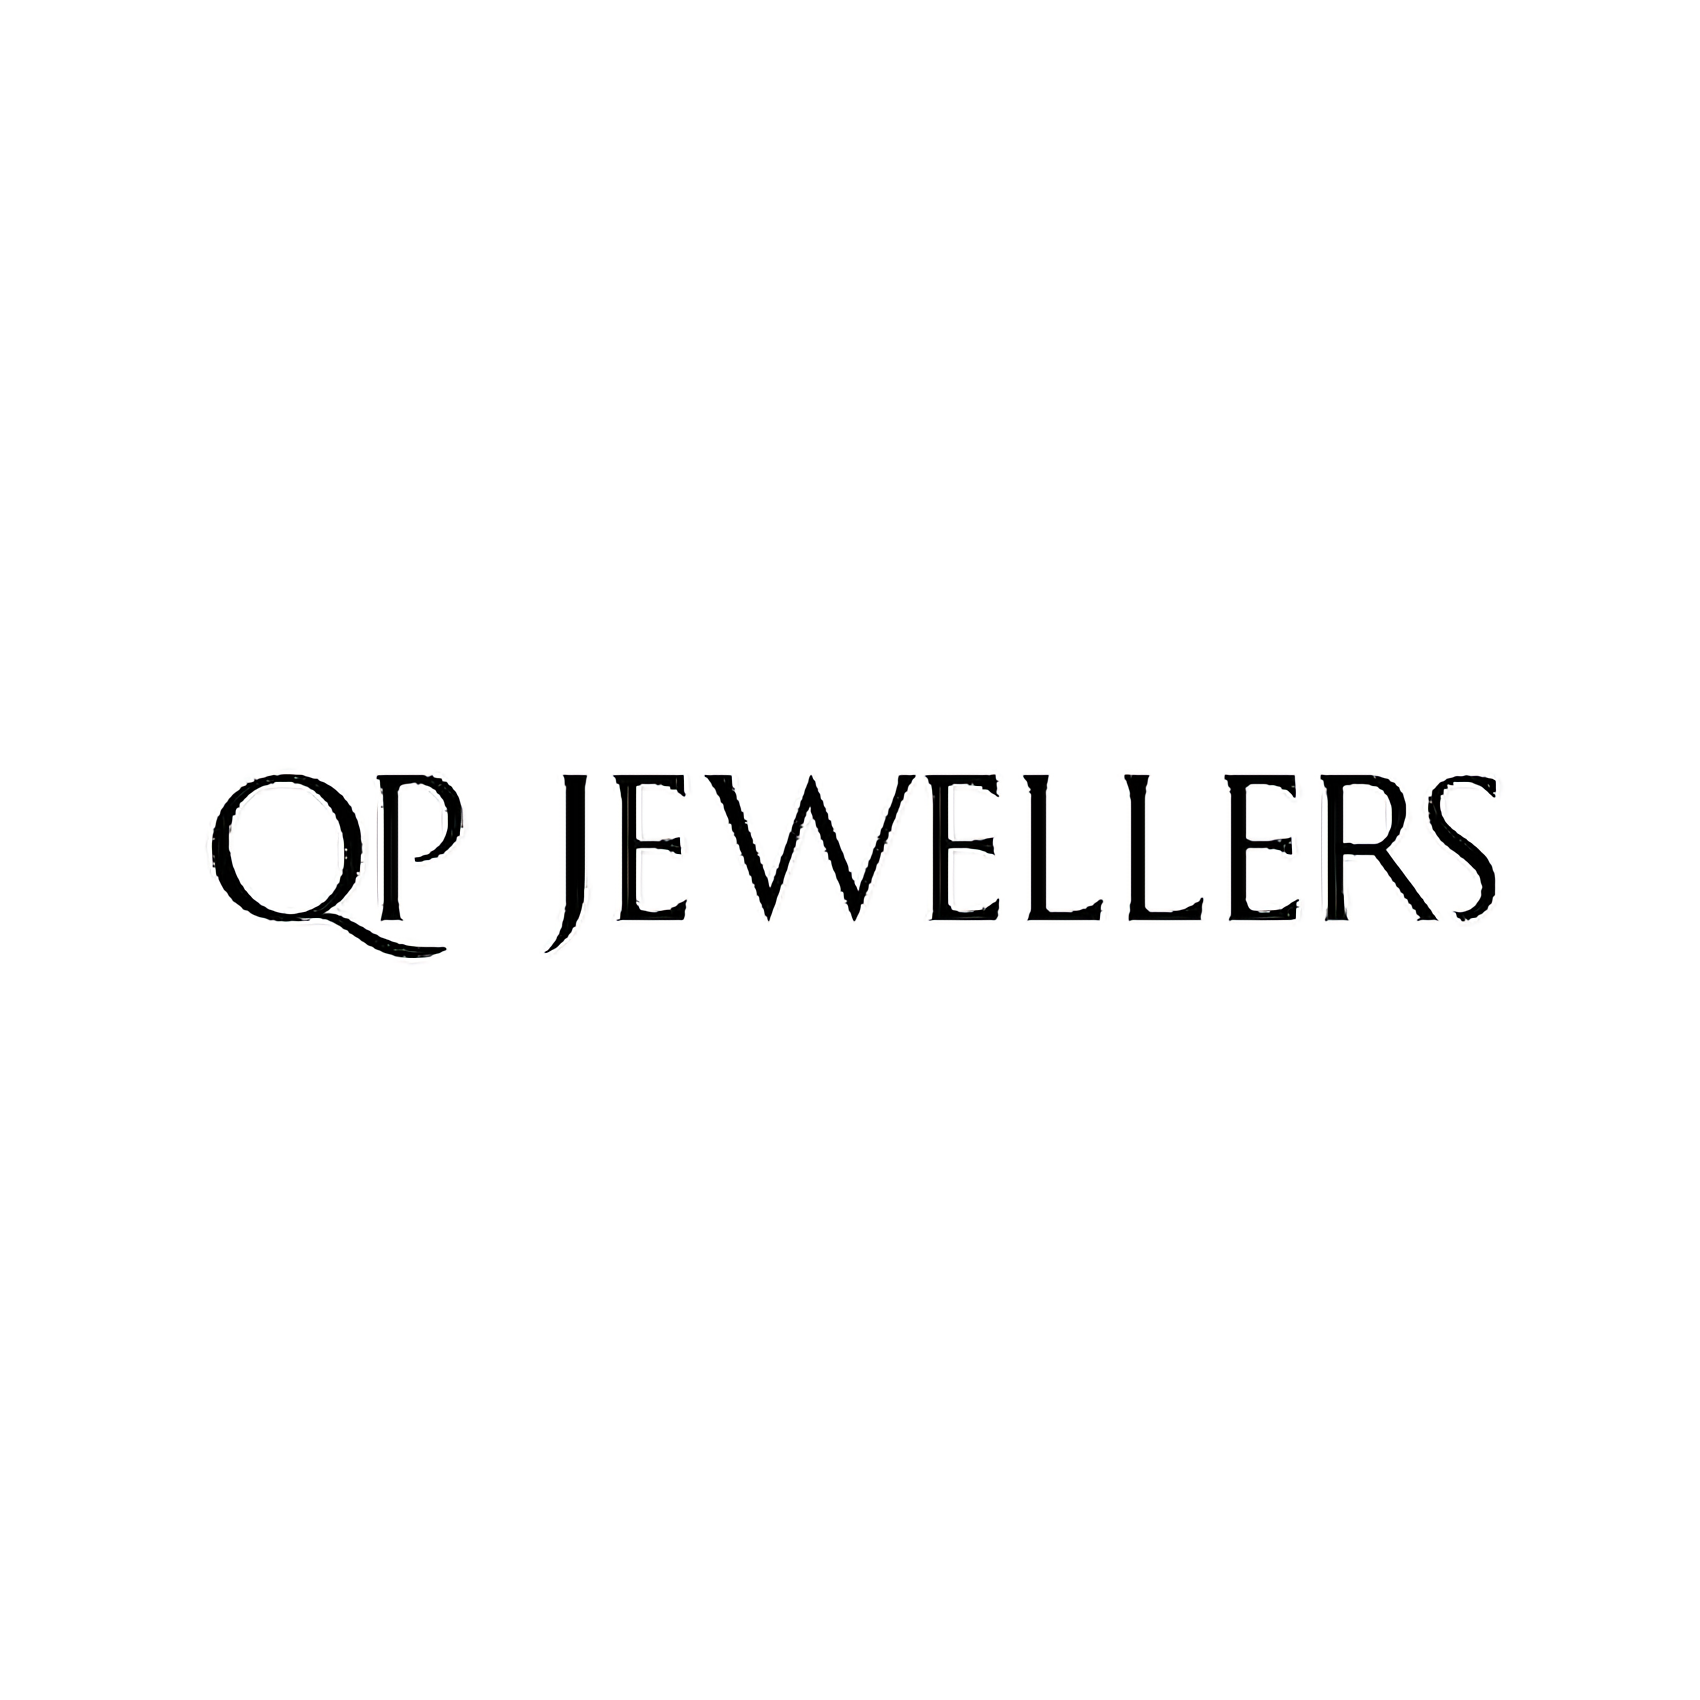 QP Jewellers Promo Code 07 2022: Find QP Jewellers Coupons & Discount Codes